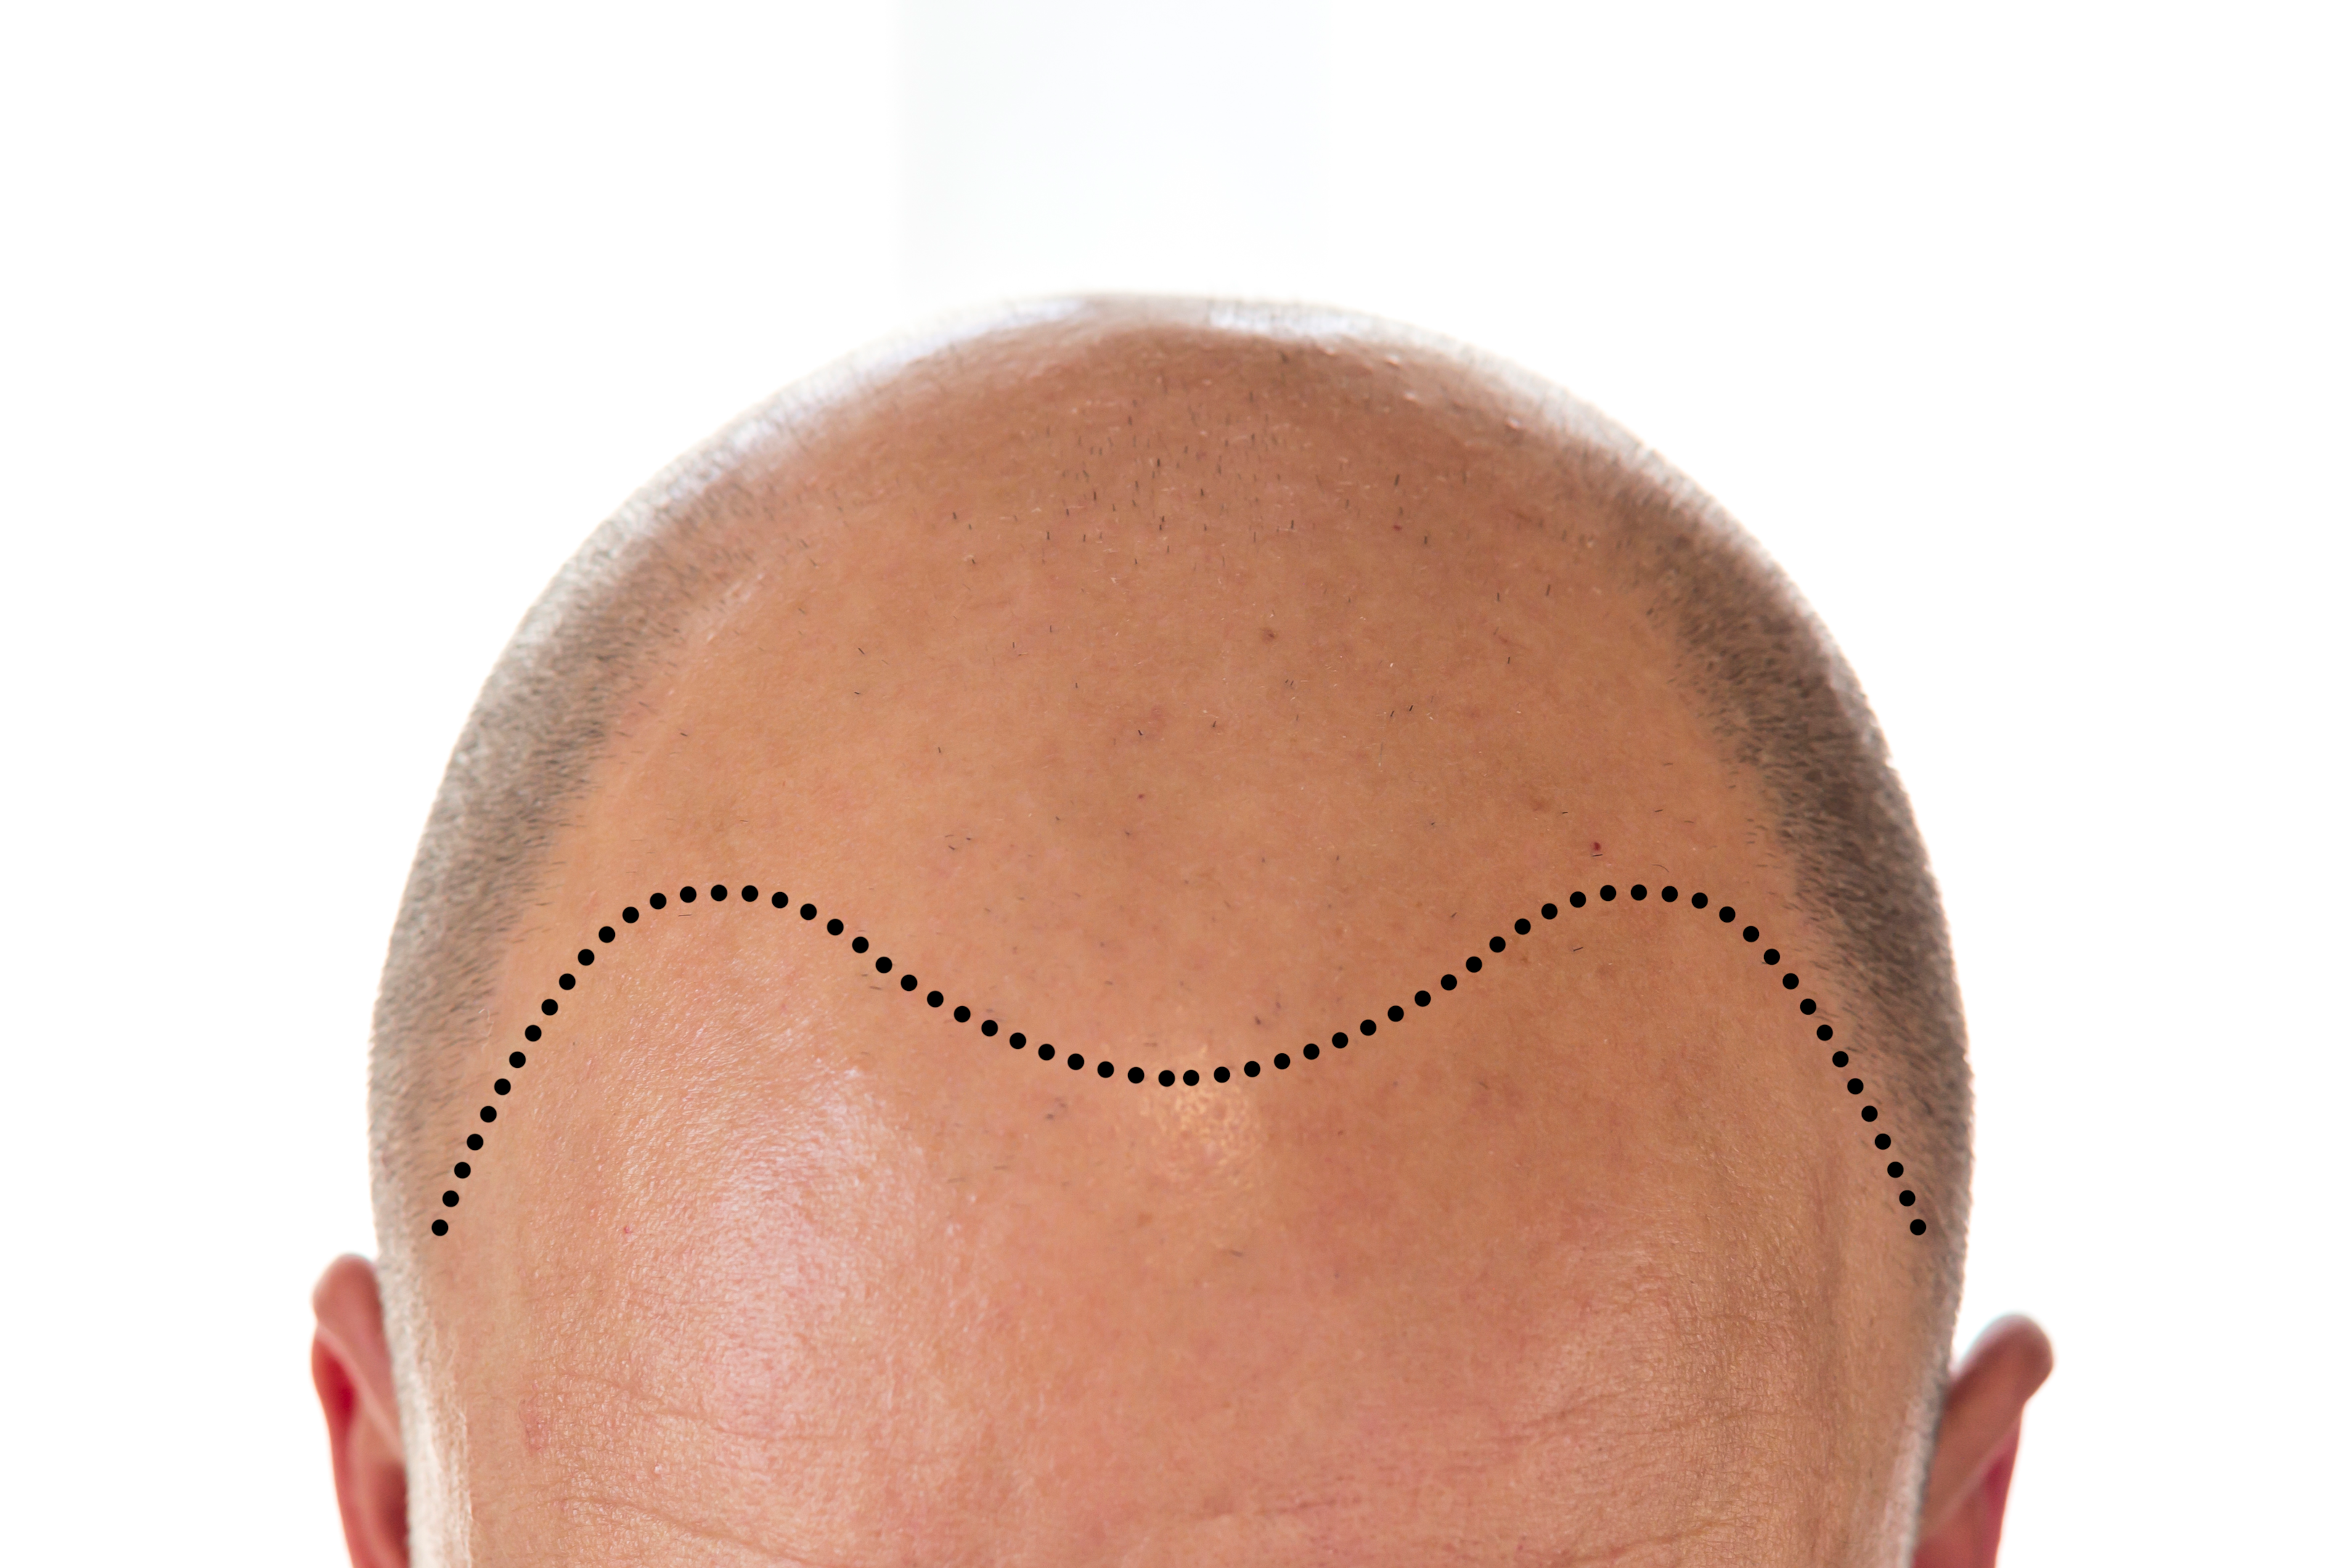 A classical 'M' shaped receding hairline.